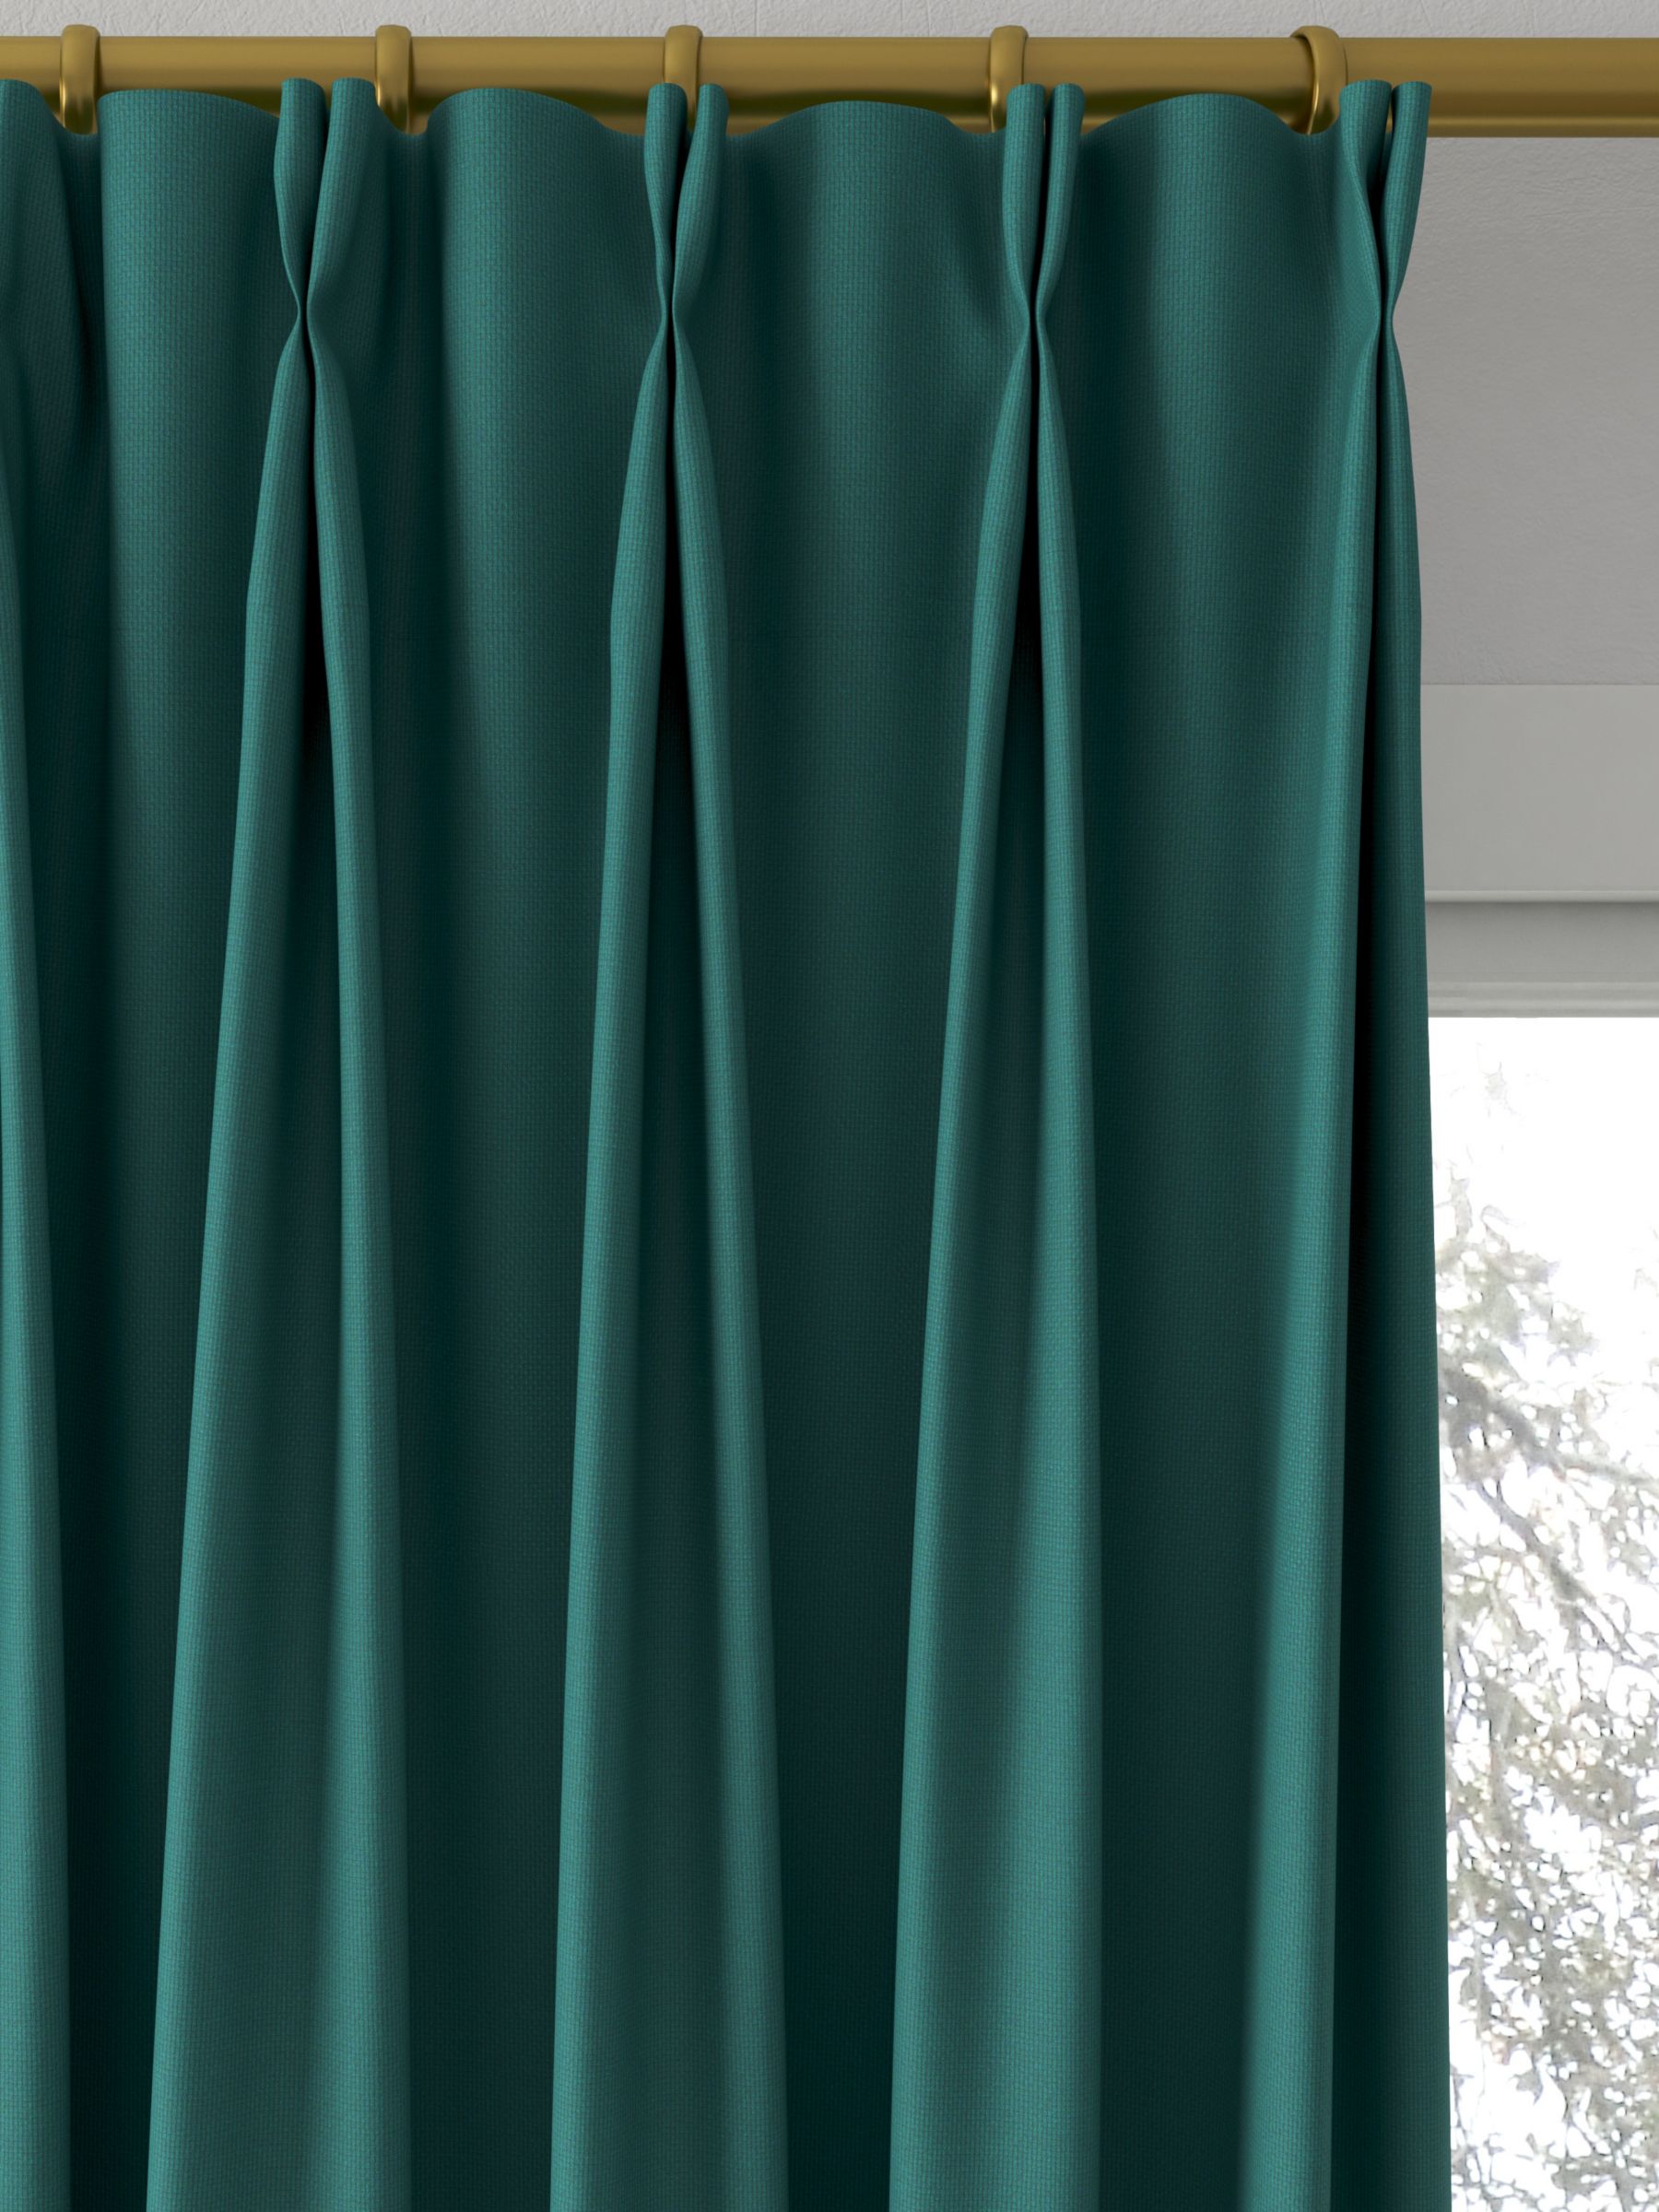 MAJGULL black-out curtains, 1 pair, dark turquoise, 57x98 - IKEA